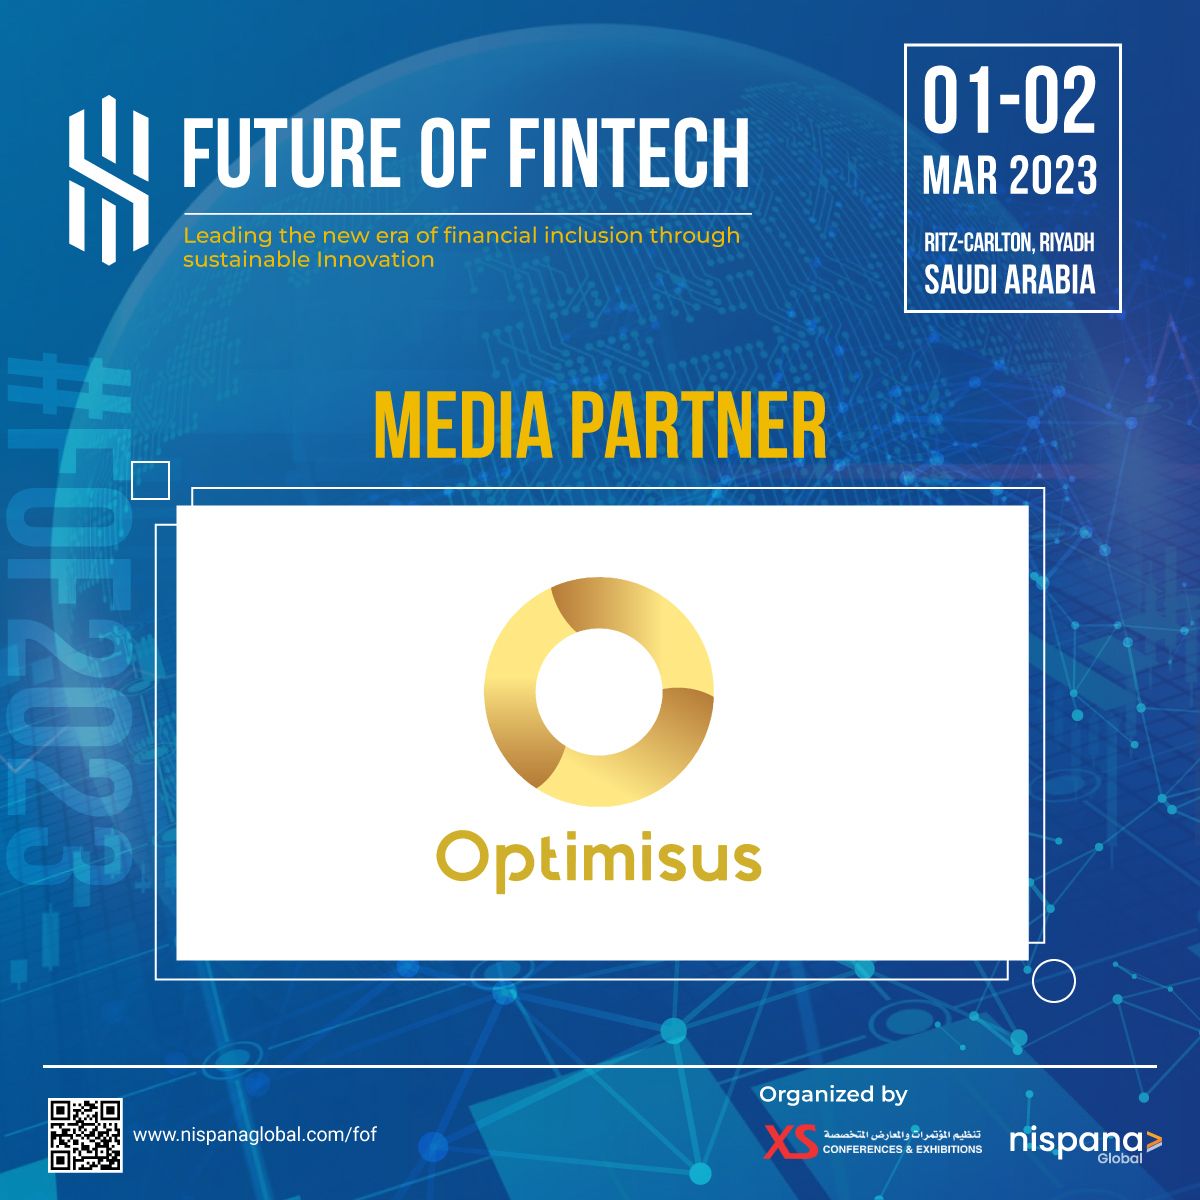 We are delighted to announce @Optimisus_media as our Media Partner for the Future of Fintech Summit in KSA.

Register now to join us - nispanaglobal.com/fof/registrati…

#paytrenfintechsyariah #fintechday #fintechstartups #fintechinnovation #fintechrevolution #fintechsolutions